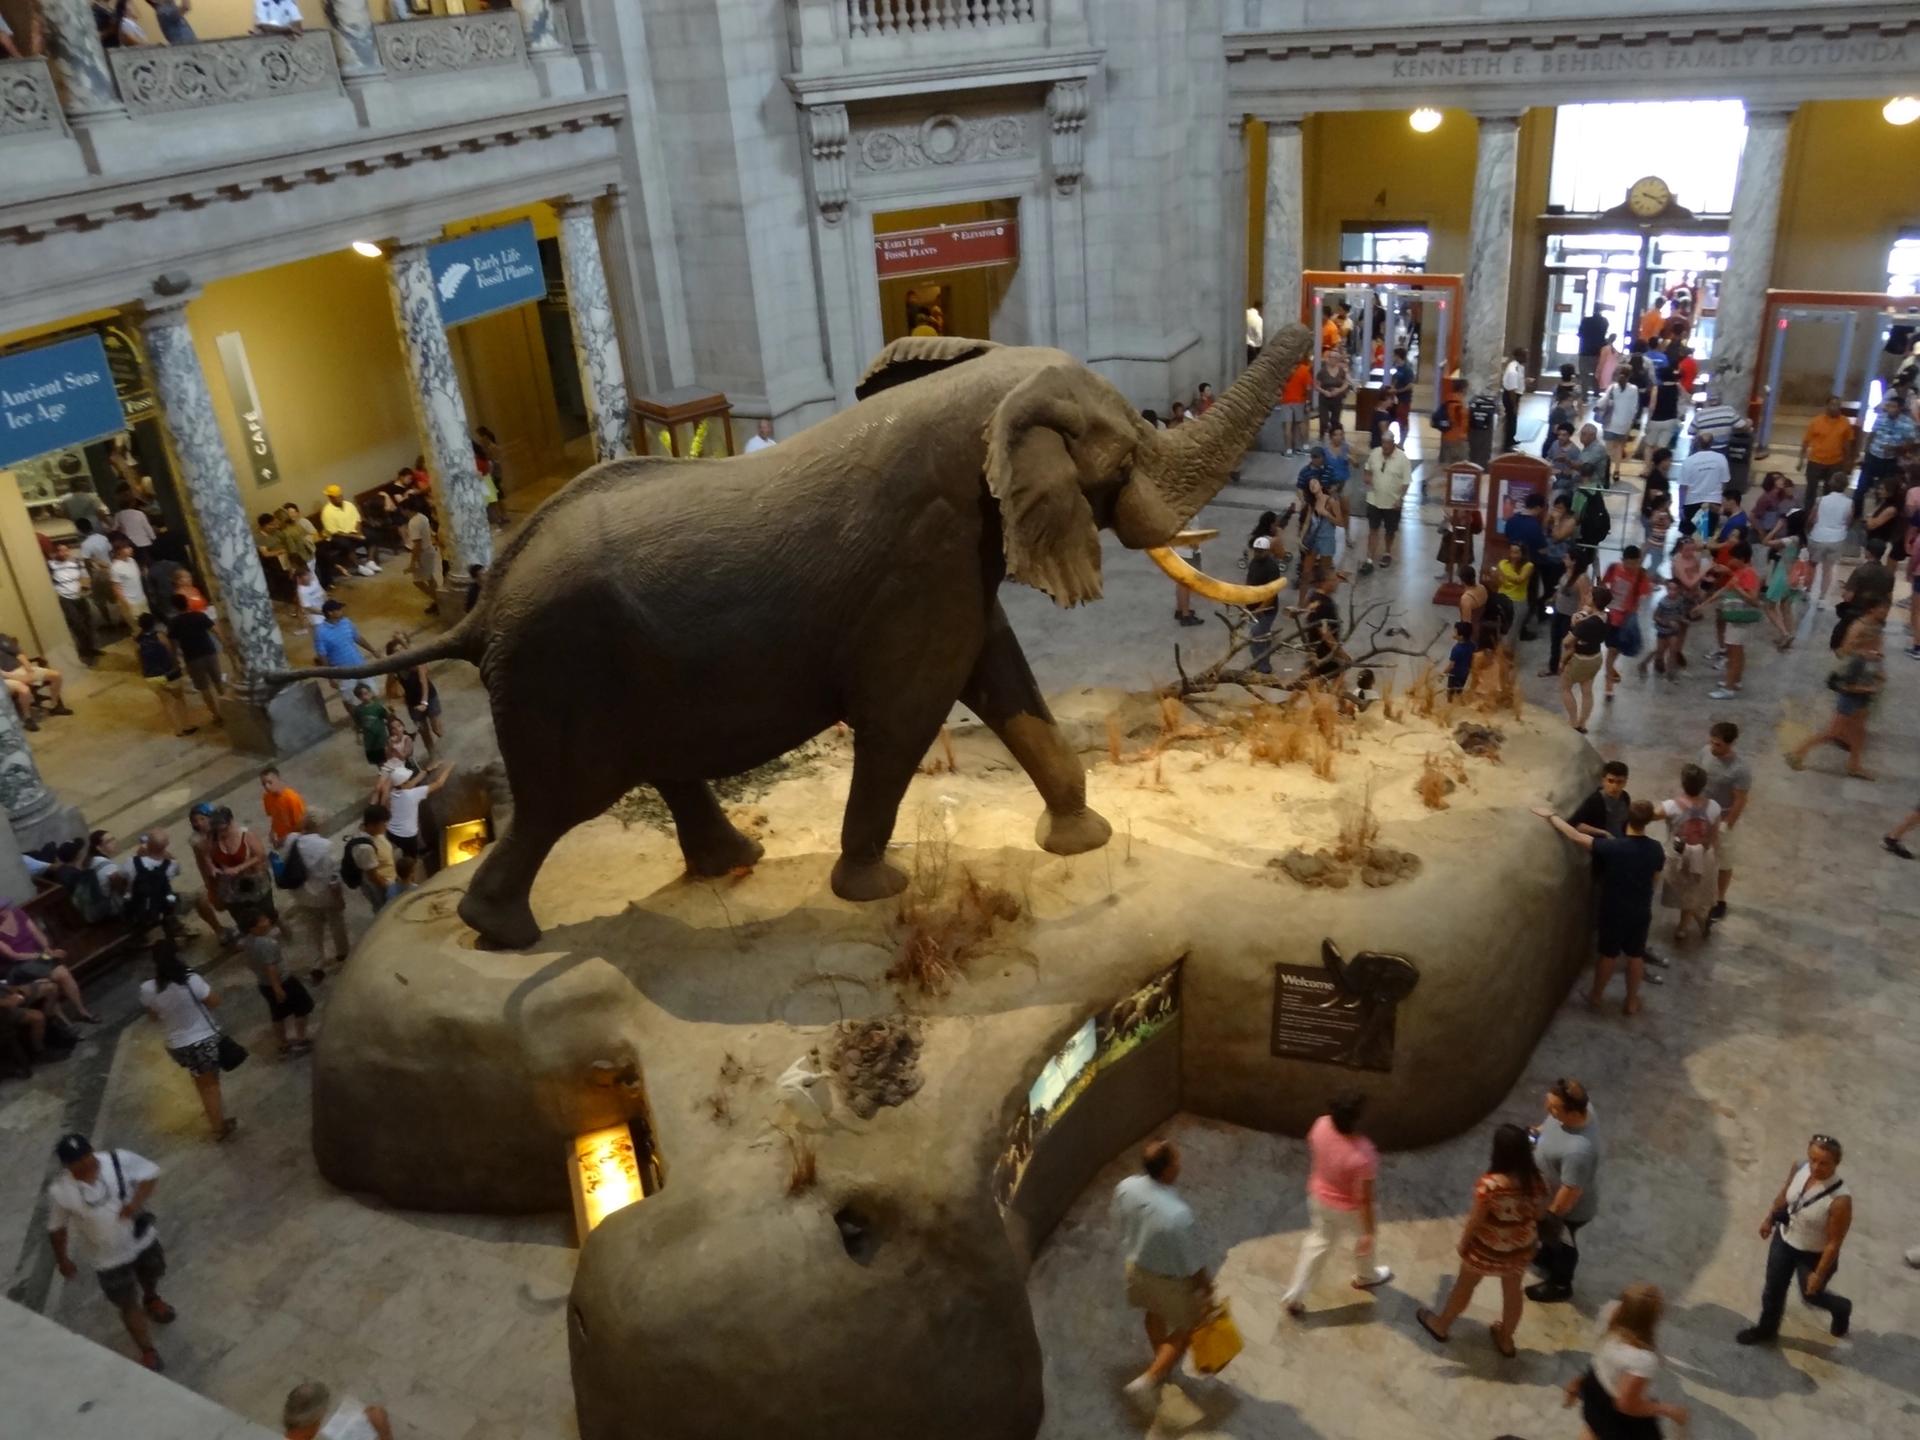 Visitors enter the National Museum of Natural History in Washington, DC Photo: Flickr user verifex